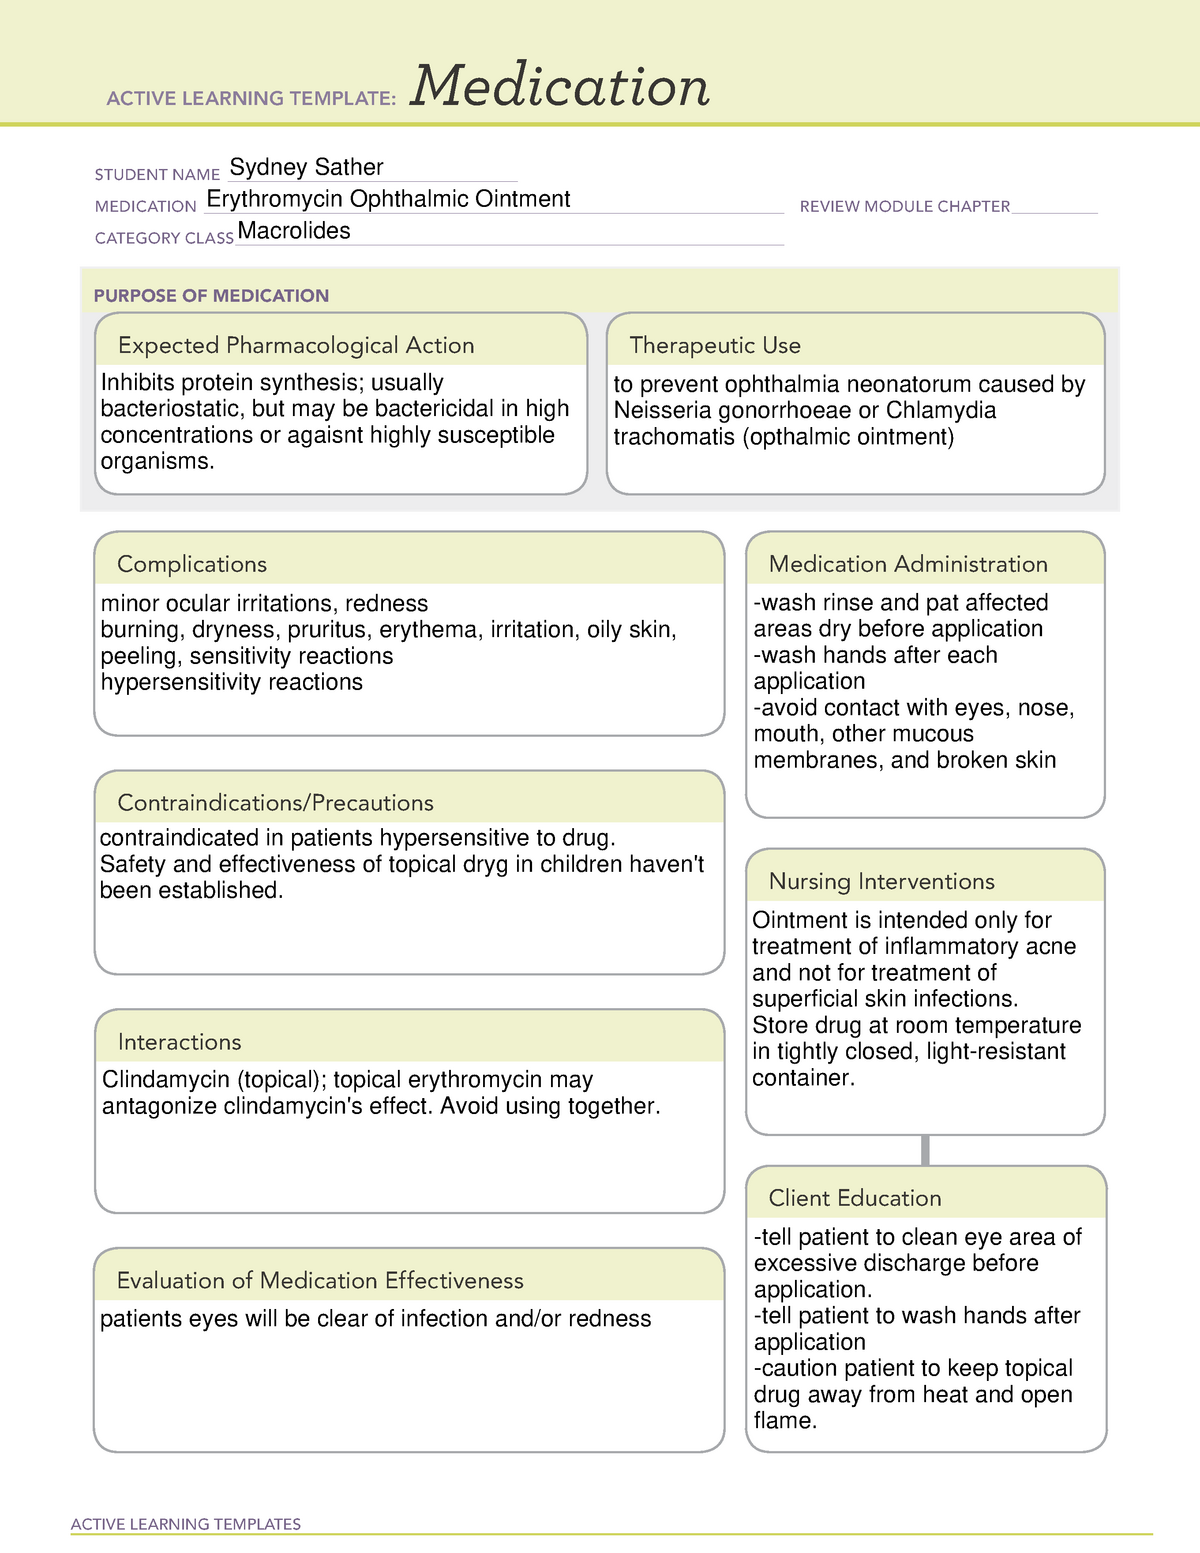 Erythromycin (opthalmic) ACTIVE LEARNING TEMPLATES Medication STUDENT